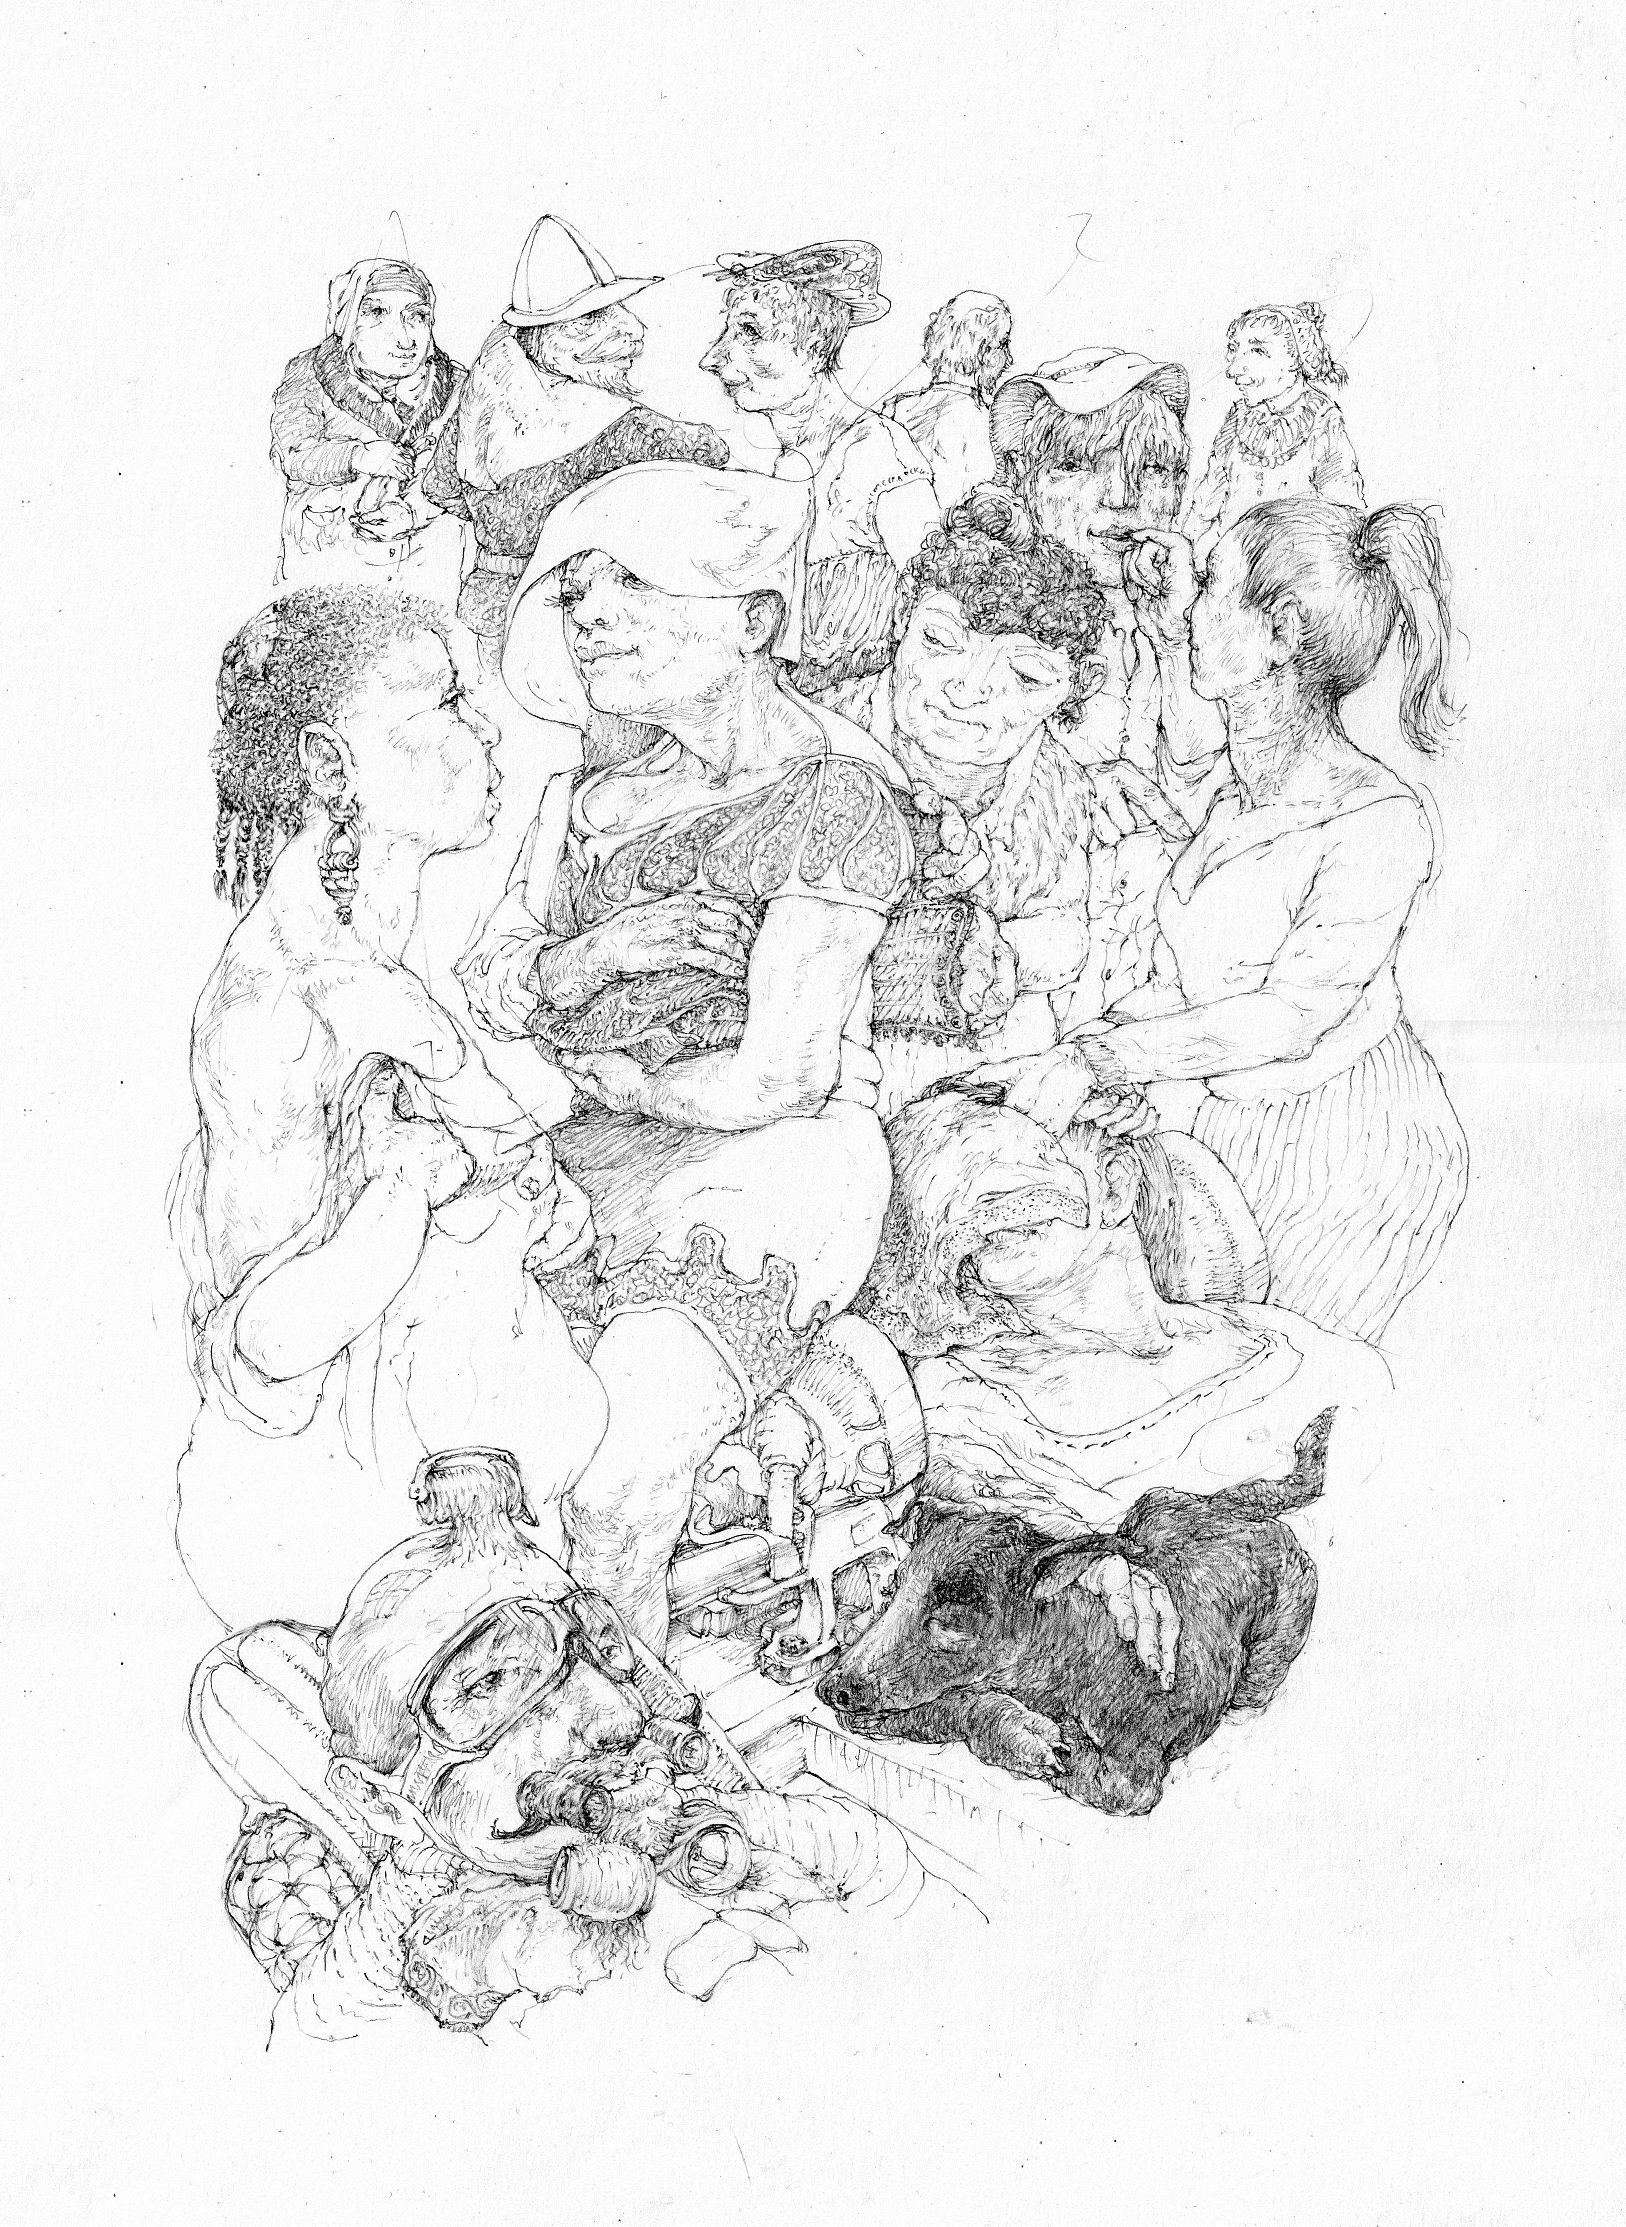 08. Recent drawings series.
<strong>Curlers. (Beauty Parlour)</strong>
Letting hair down, fixing it up and other intimacies.
(2b Pencil drawing, A3. 180grm. Canson “Bristol”)